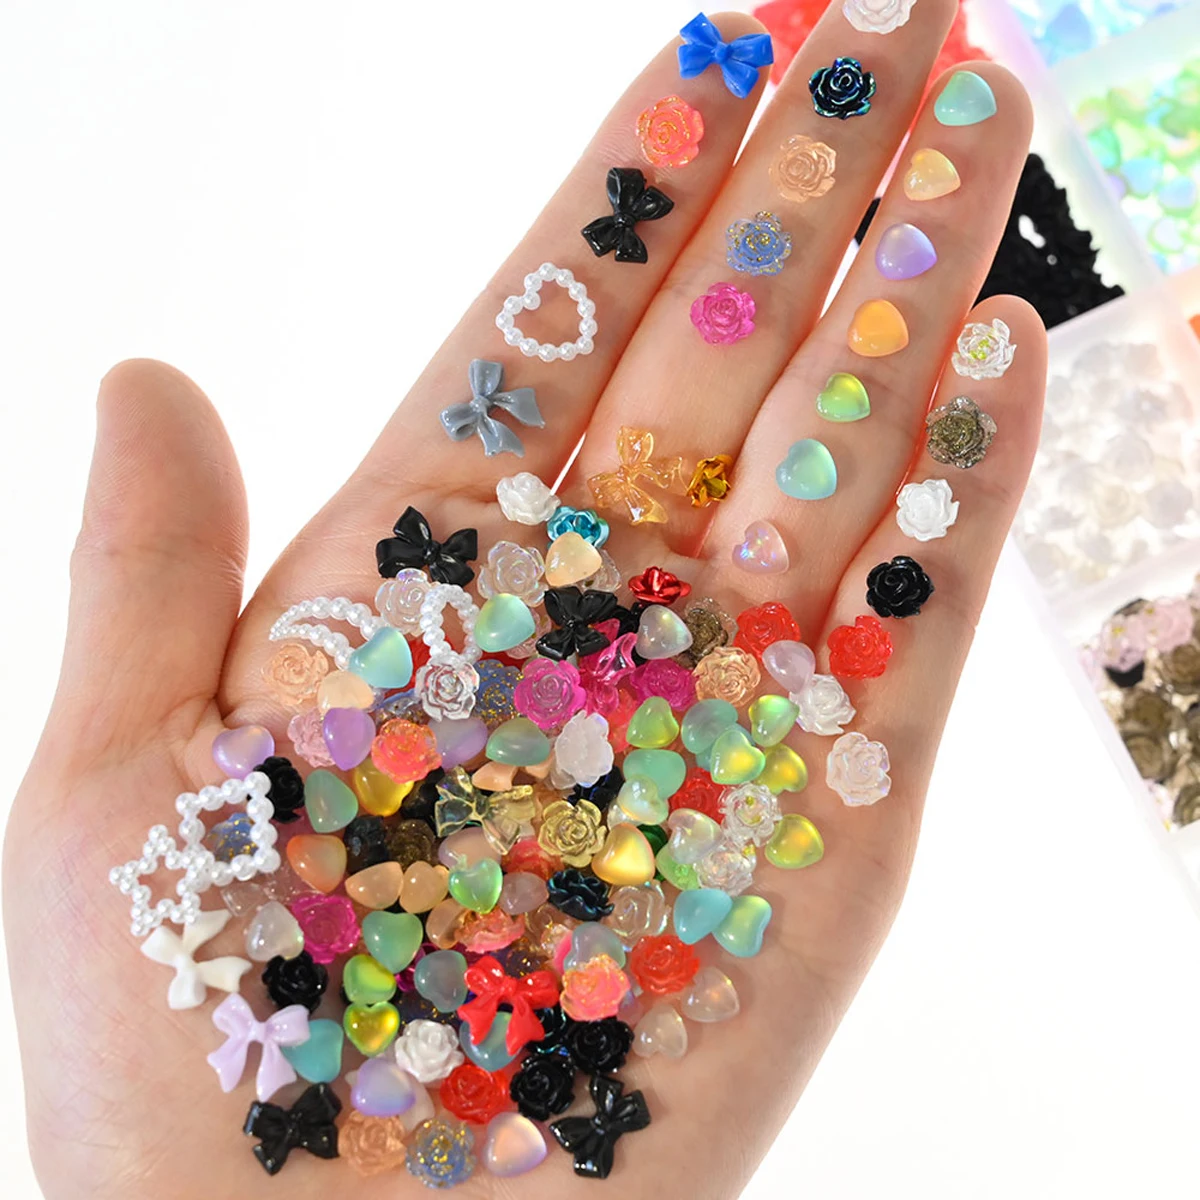 500-600pcs Bow Flower Nail Art Resin Decorations Mix Shapes Nail Charms Press on Manicure Supplies Jewelry Kawaii Accessories *& images - 6